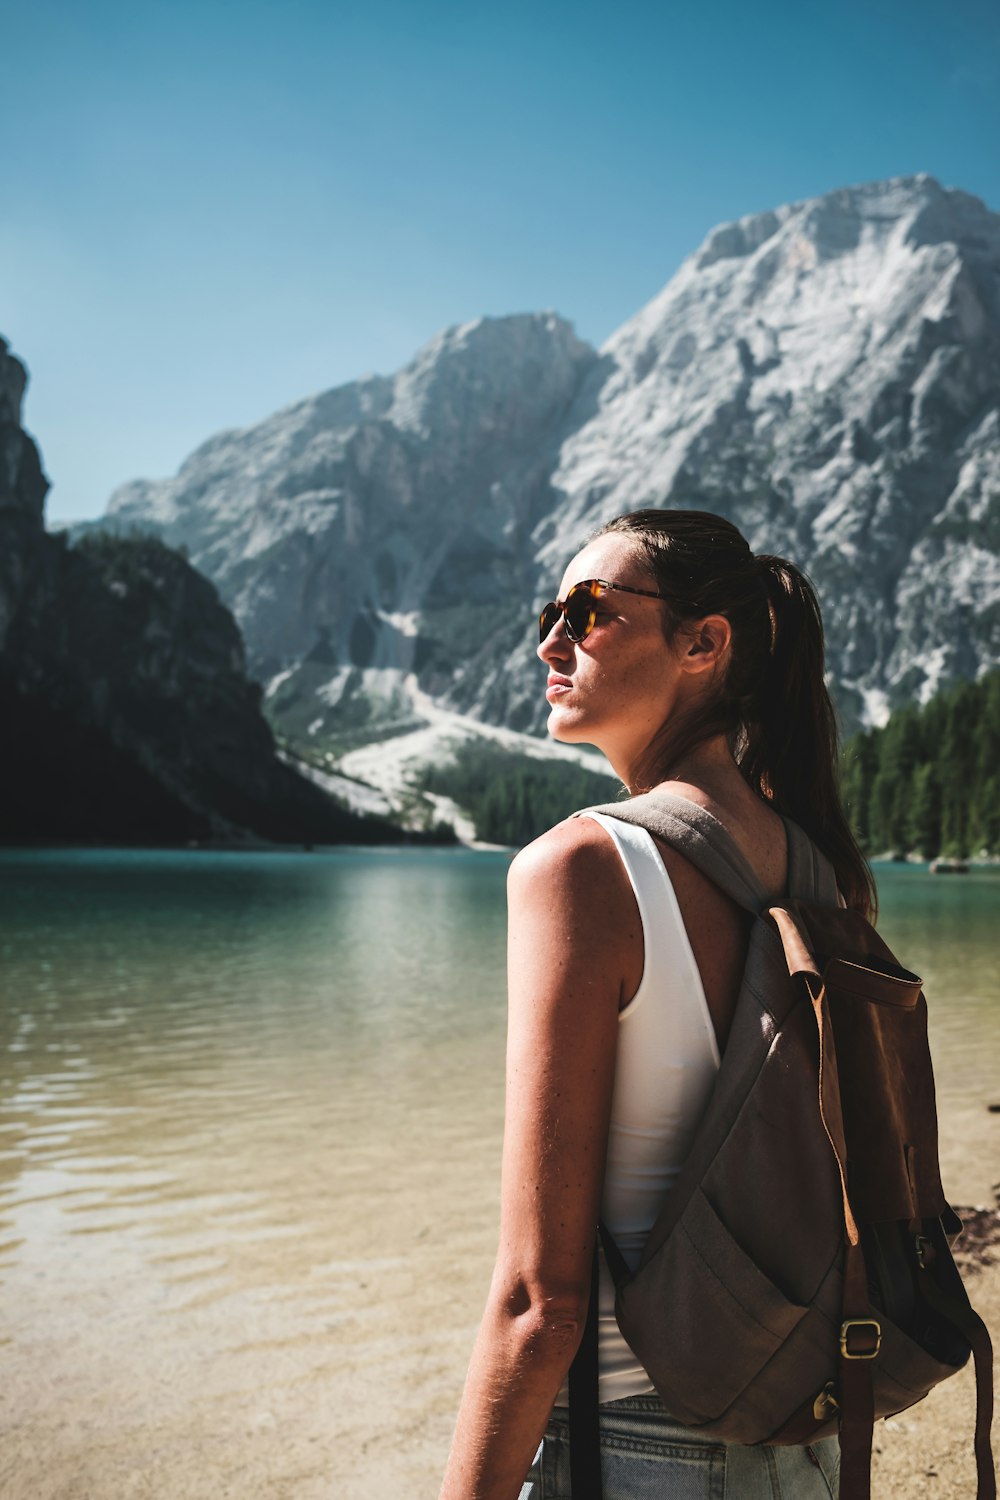 photo of woman wearing white tank top and gray backpack standing near body of water